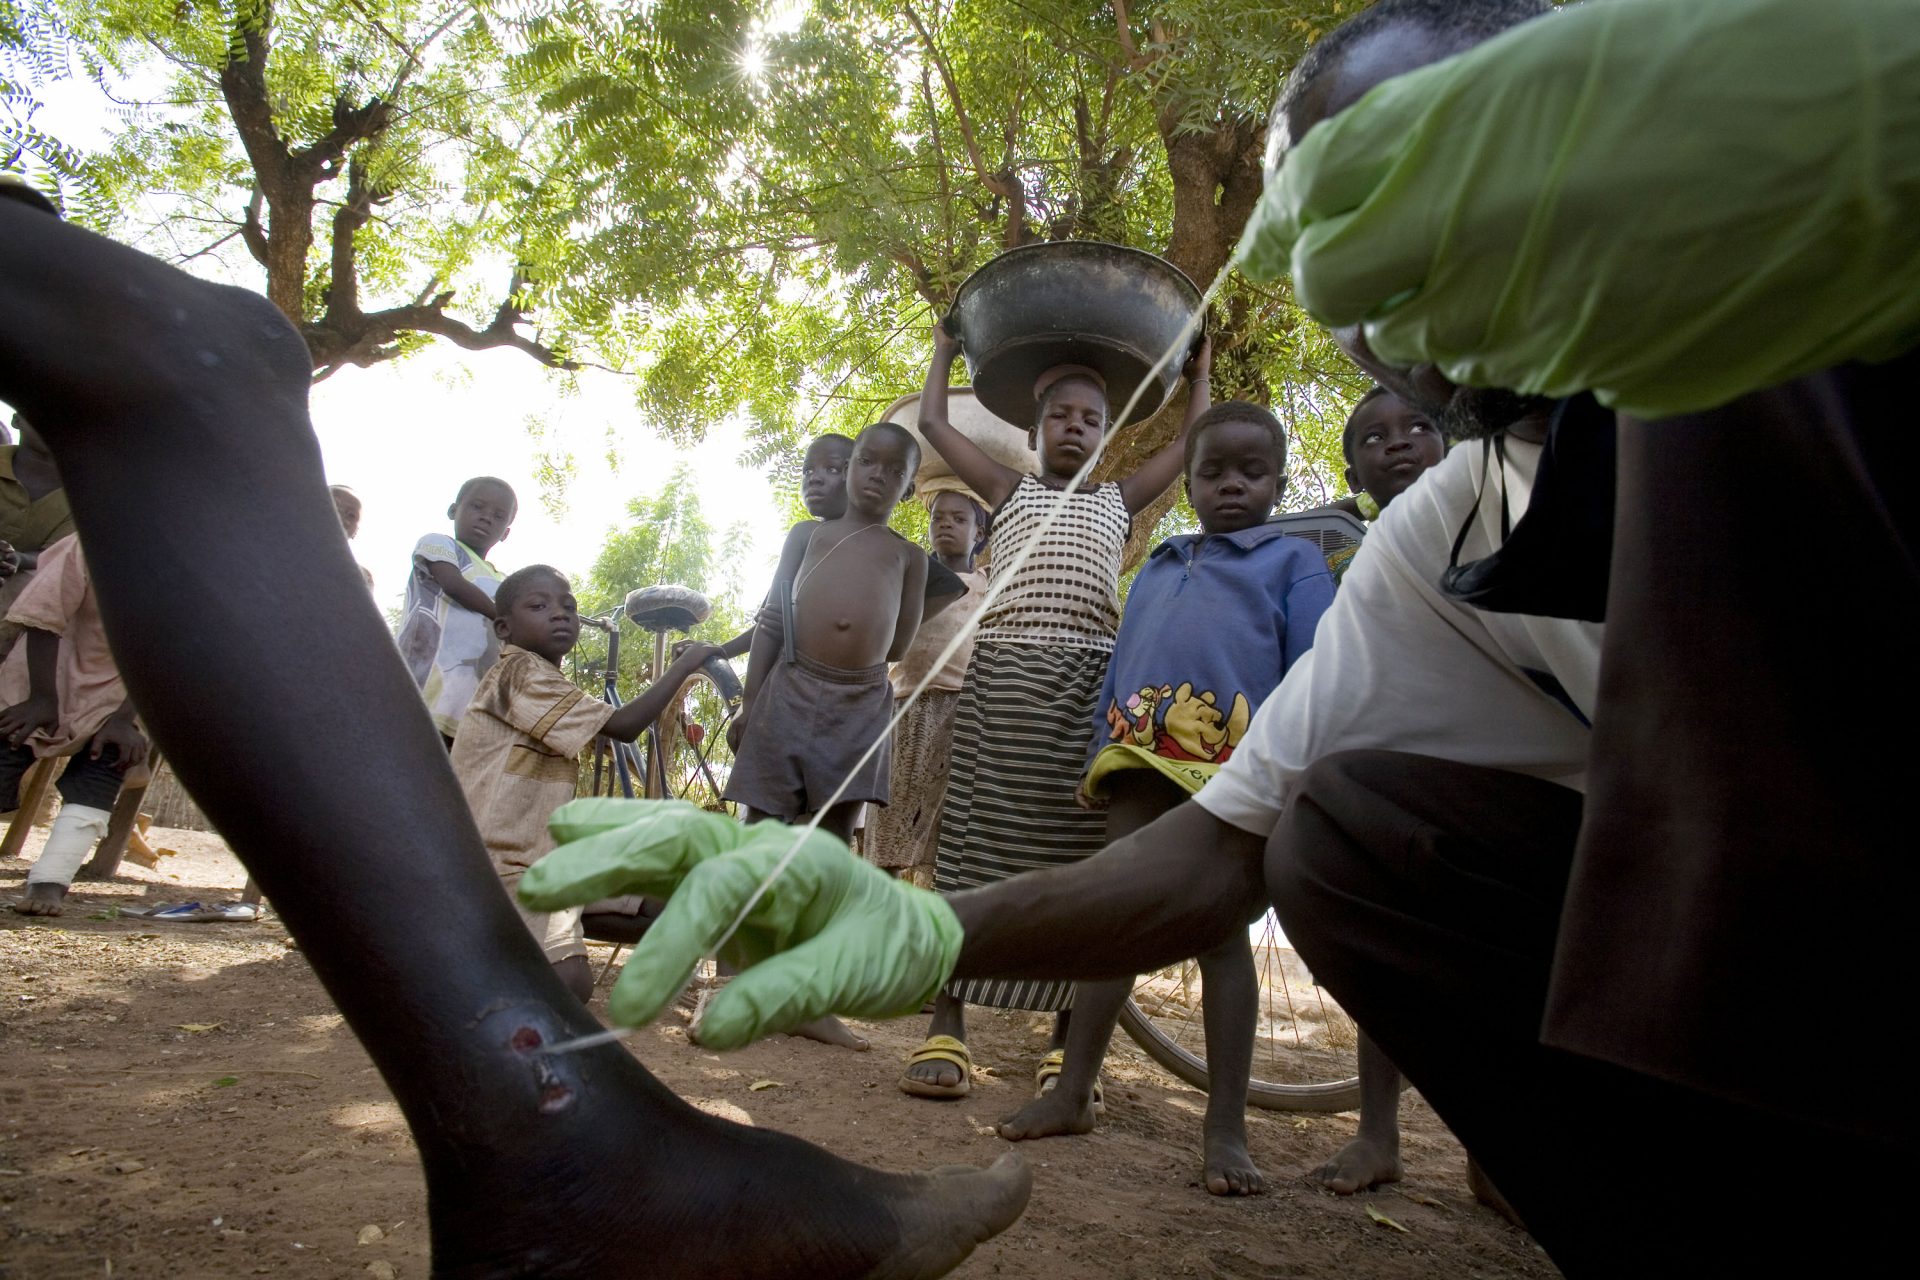 The Guinea Worm is the stuff of nightmares